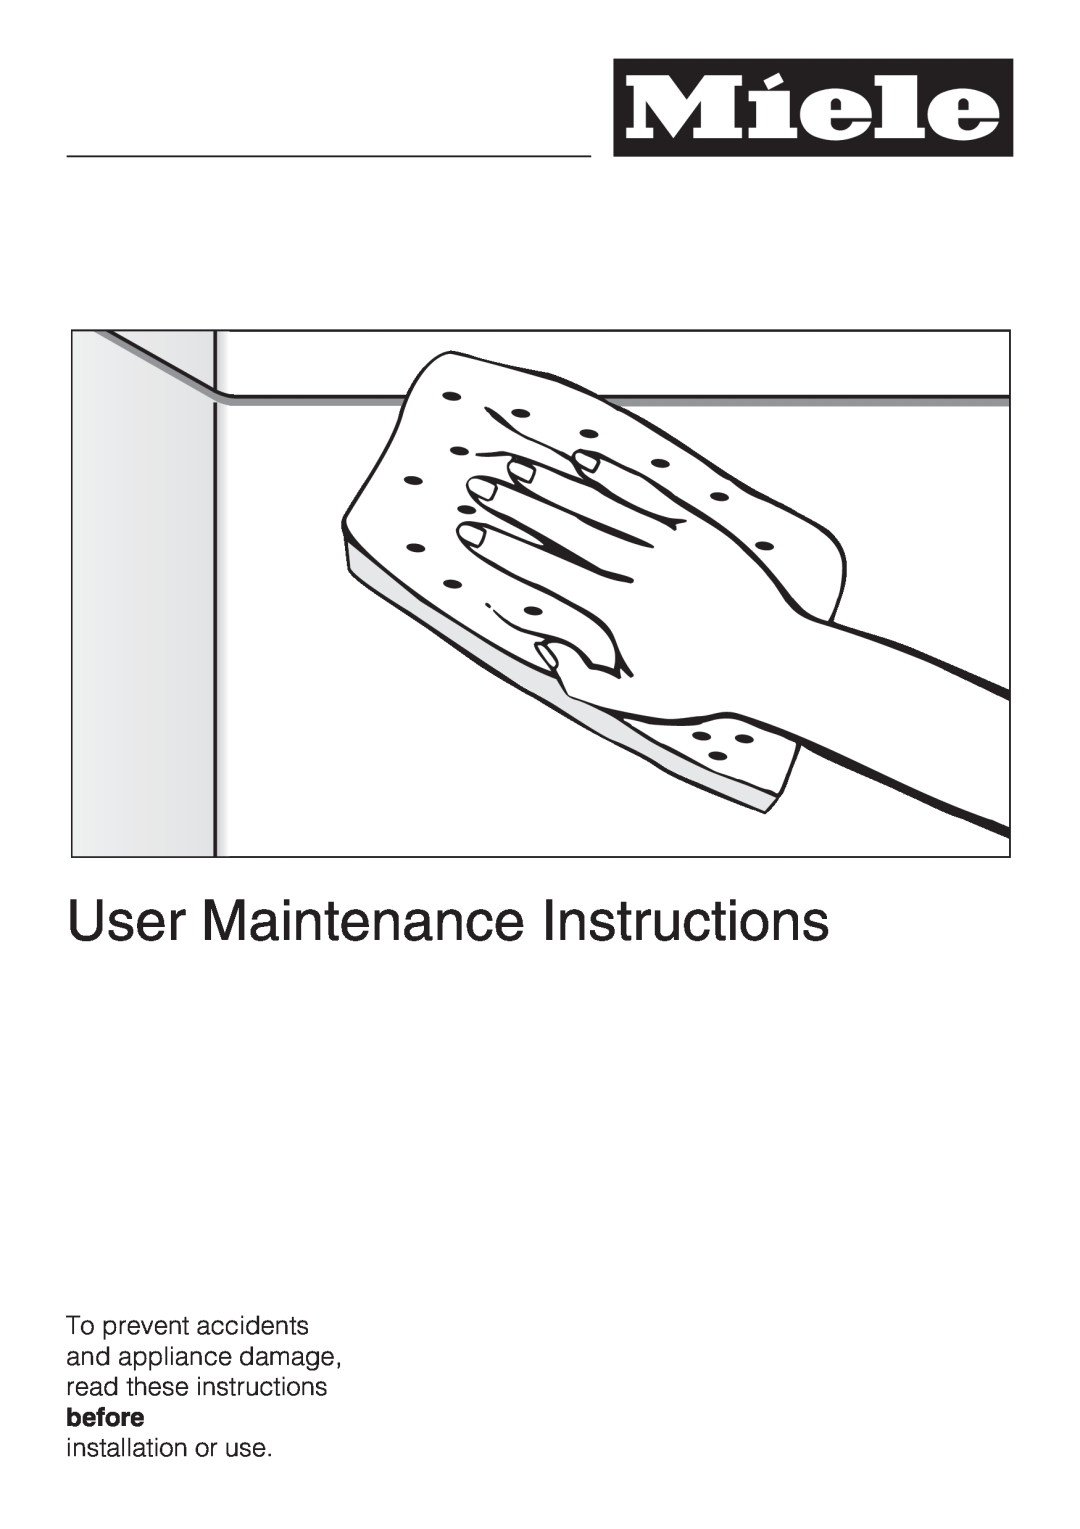 Miele G 1472, G 2472 manual User Maintenance Instructions, installation or use 